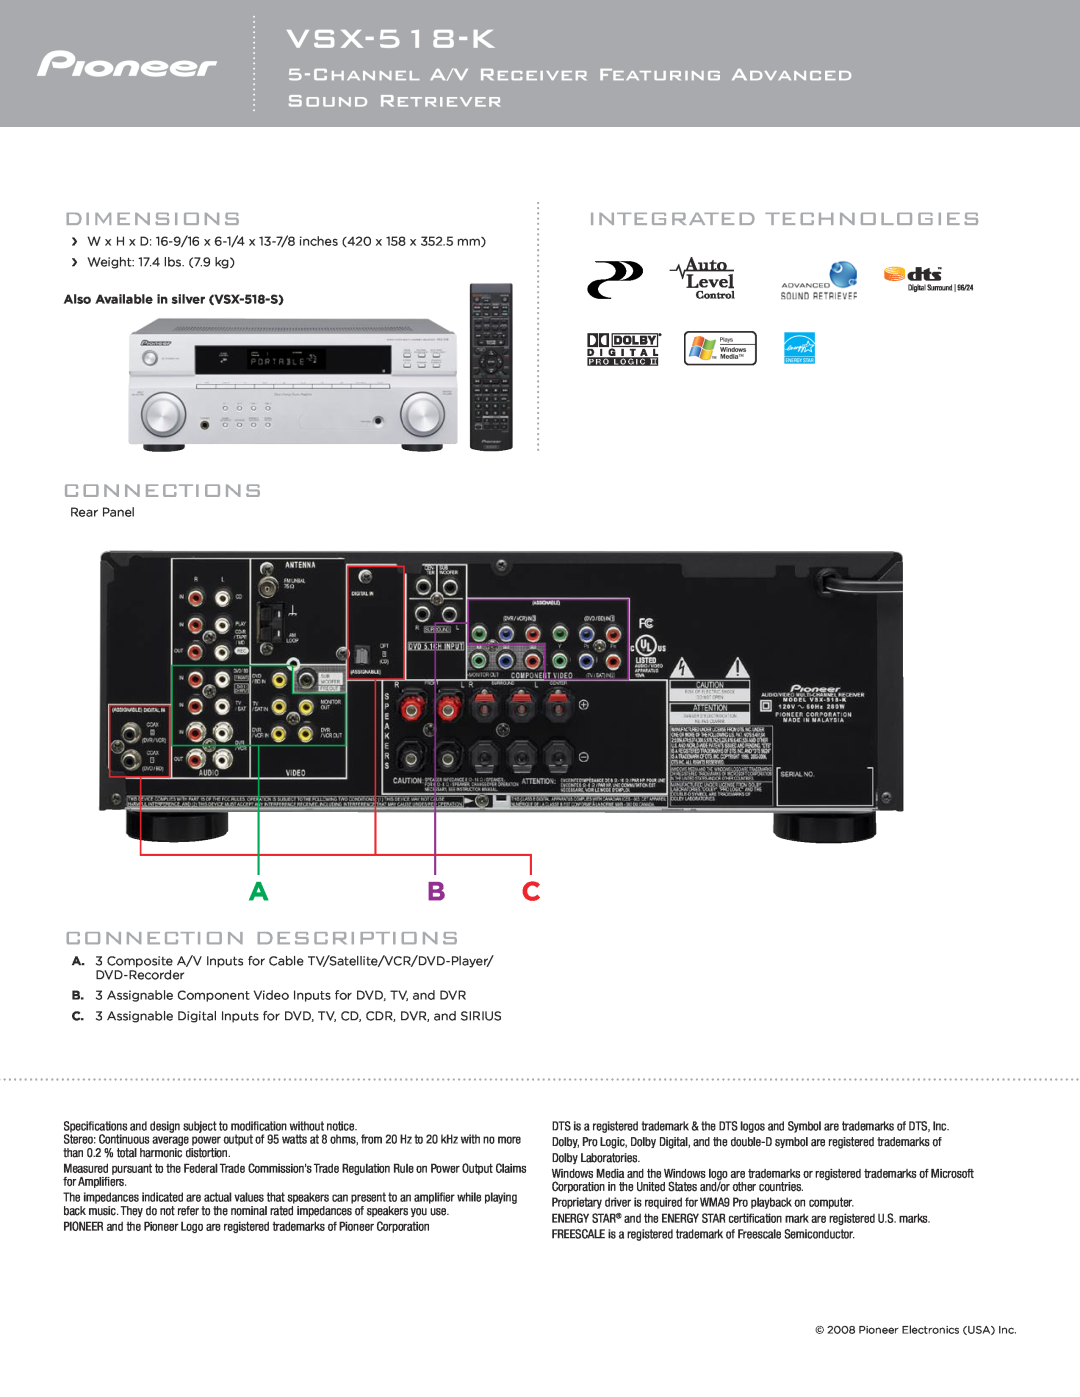 Pioneer VSX-518-K specifications Dimensions, Integrated Technologies, Connections, Connection Descriptions, A B C 